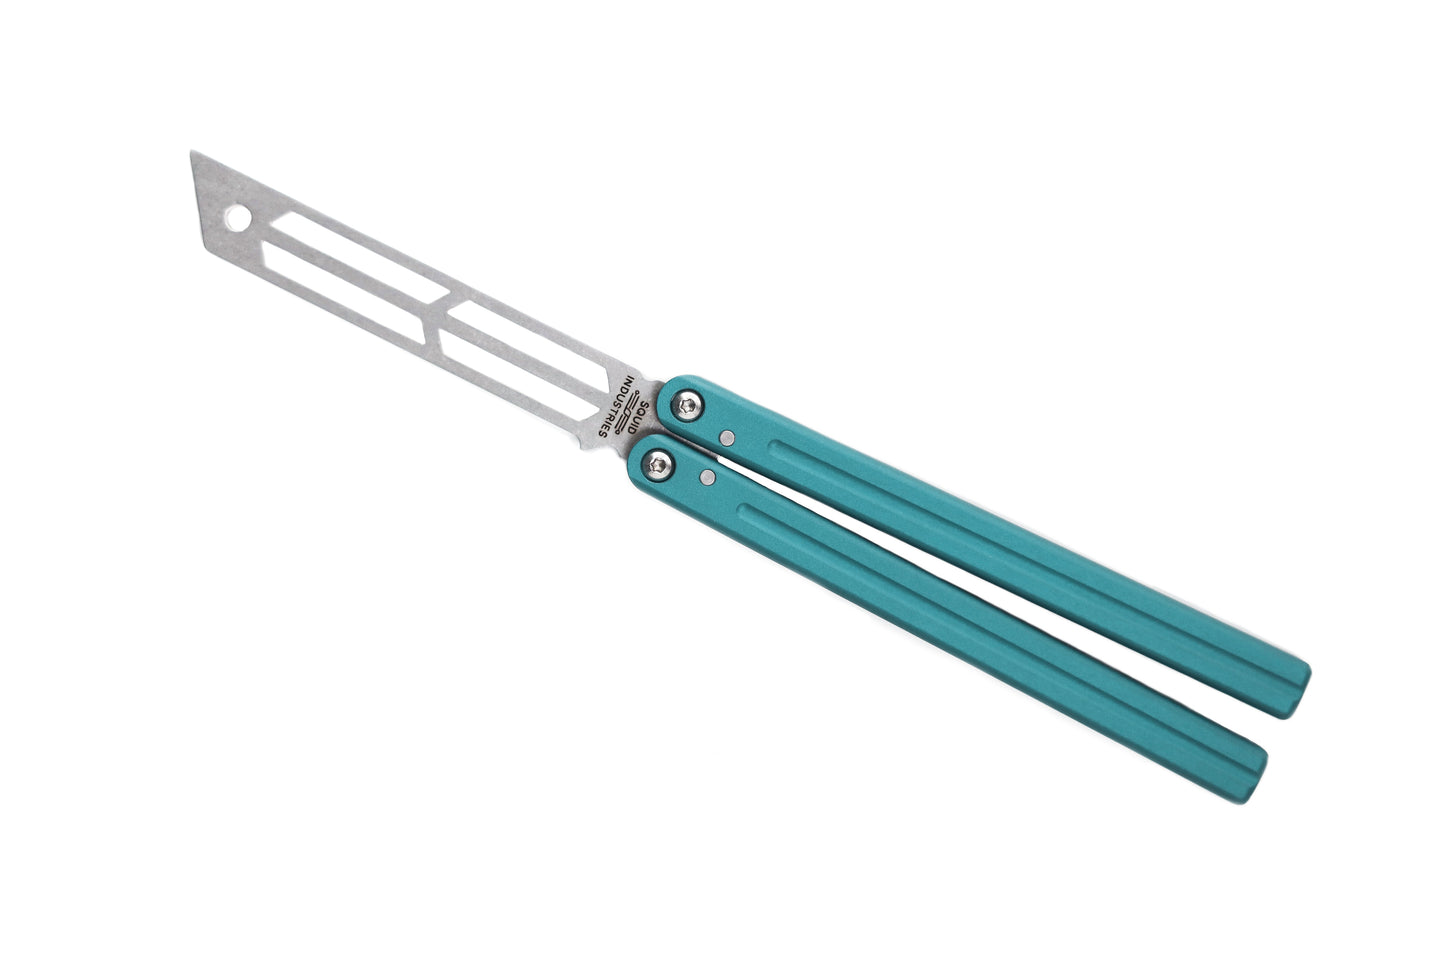 Teal Triton V2 Clearance Blemished Balisong Butterfly Knife Trainer